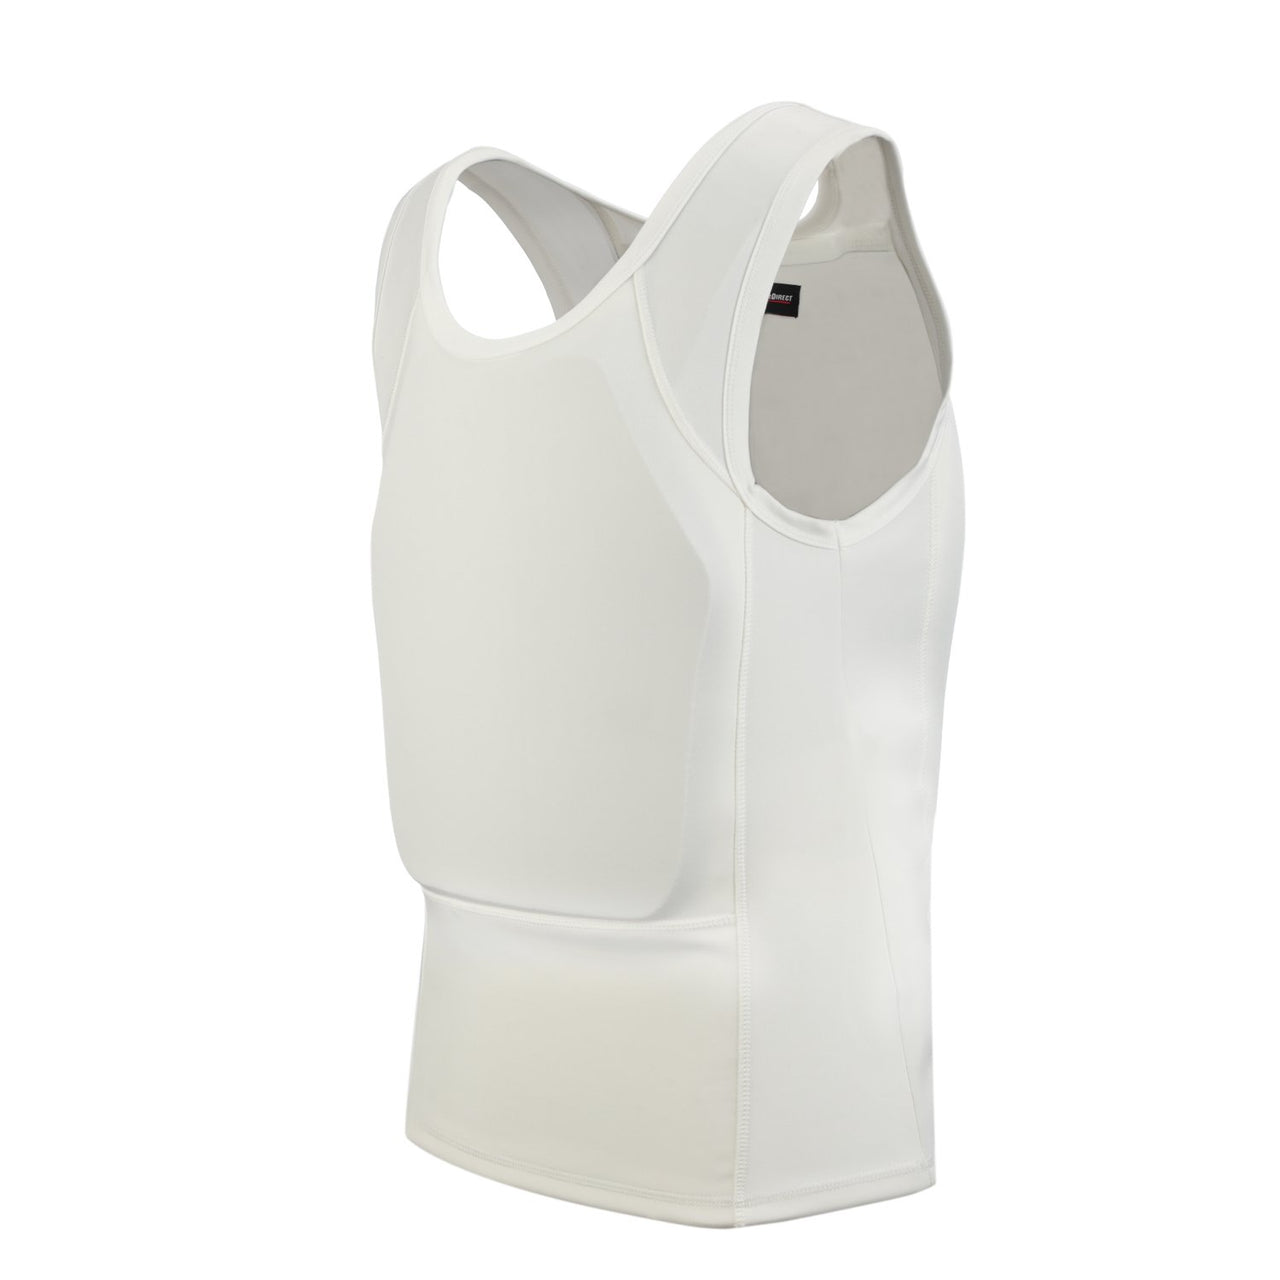 The back view of a Body Armor Direct Concealable Express T-Shirt Carrier vest.